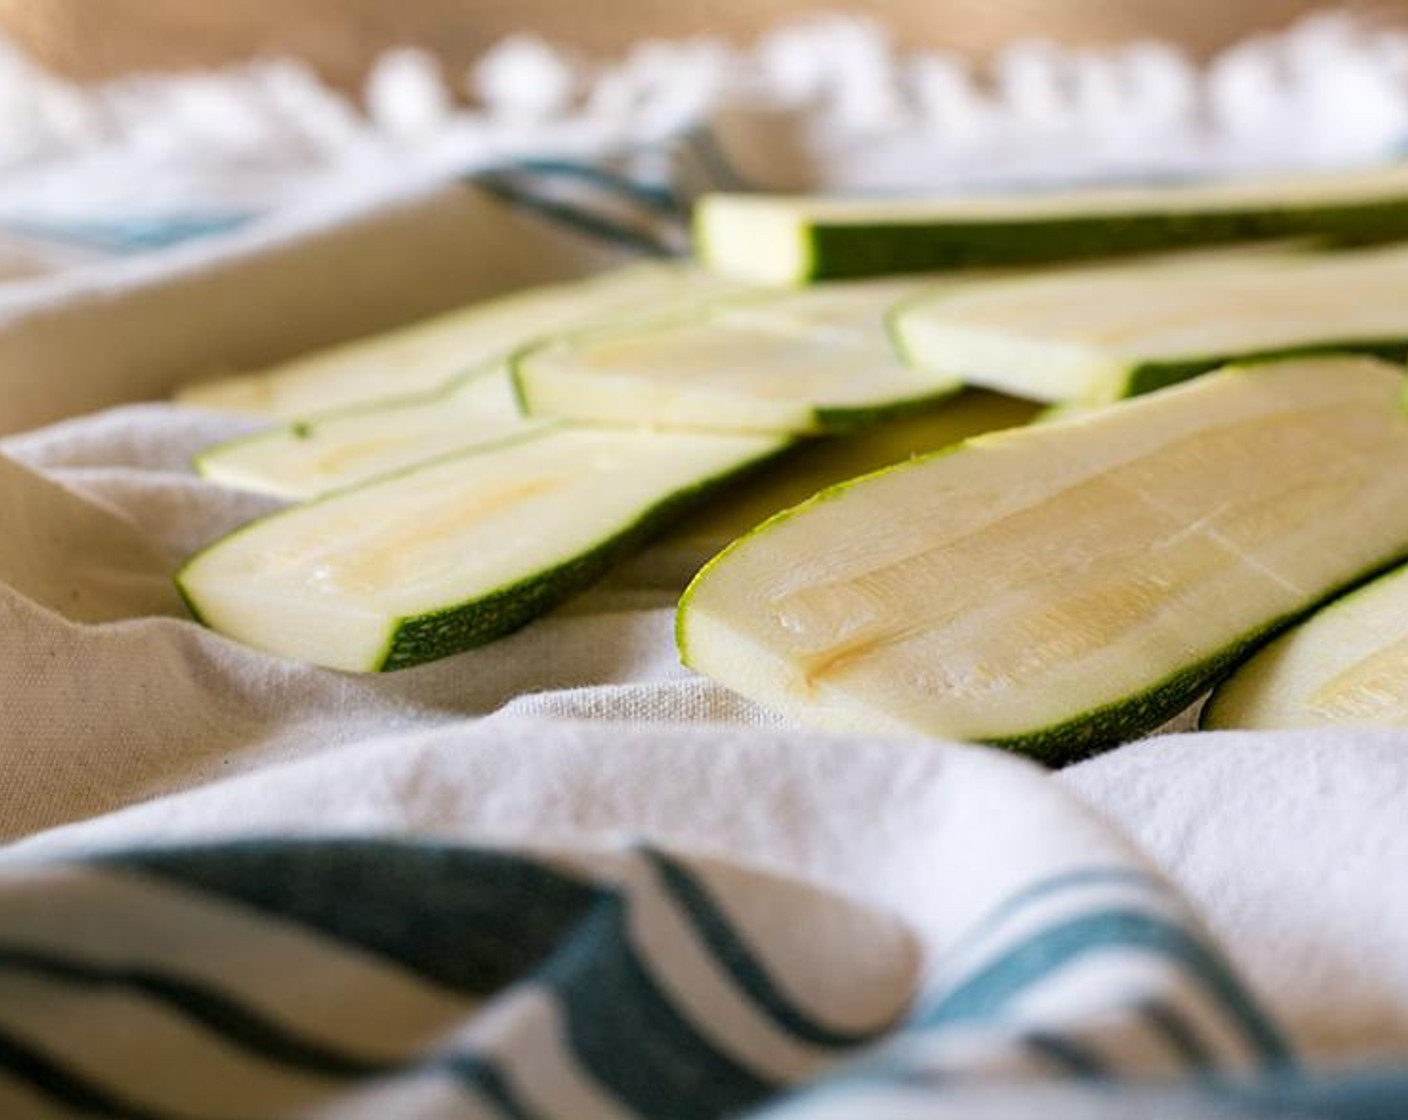 step 1 Slice Zucchini (2) into long thin strips, then lay out on fresh paper towels and coat with layer of salt, then let them sit for about 15 minutes. This helps to sweat the water out. After the 15 minutes, apply pressure with a paper towel to remove some of that moisture.